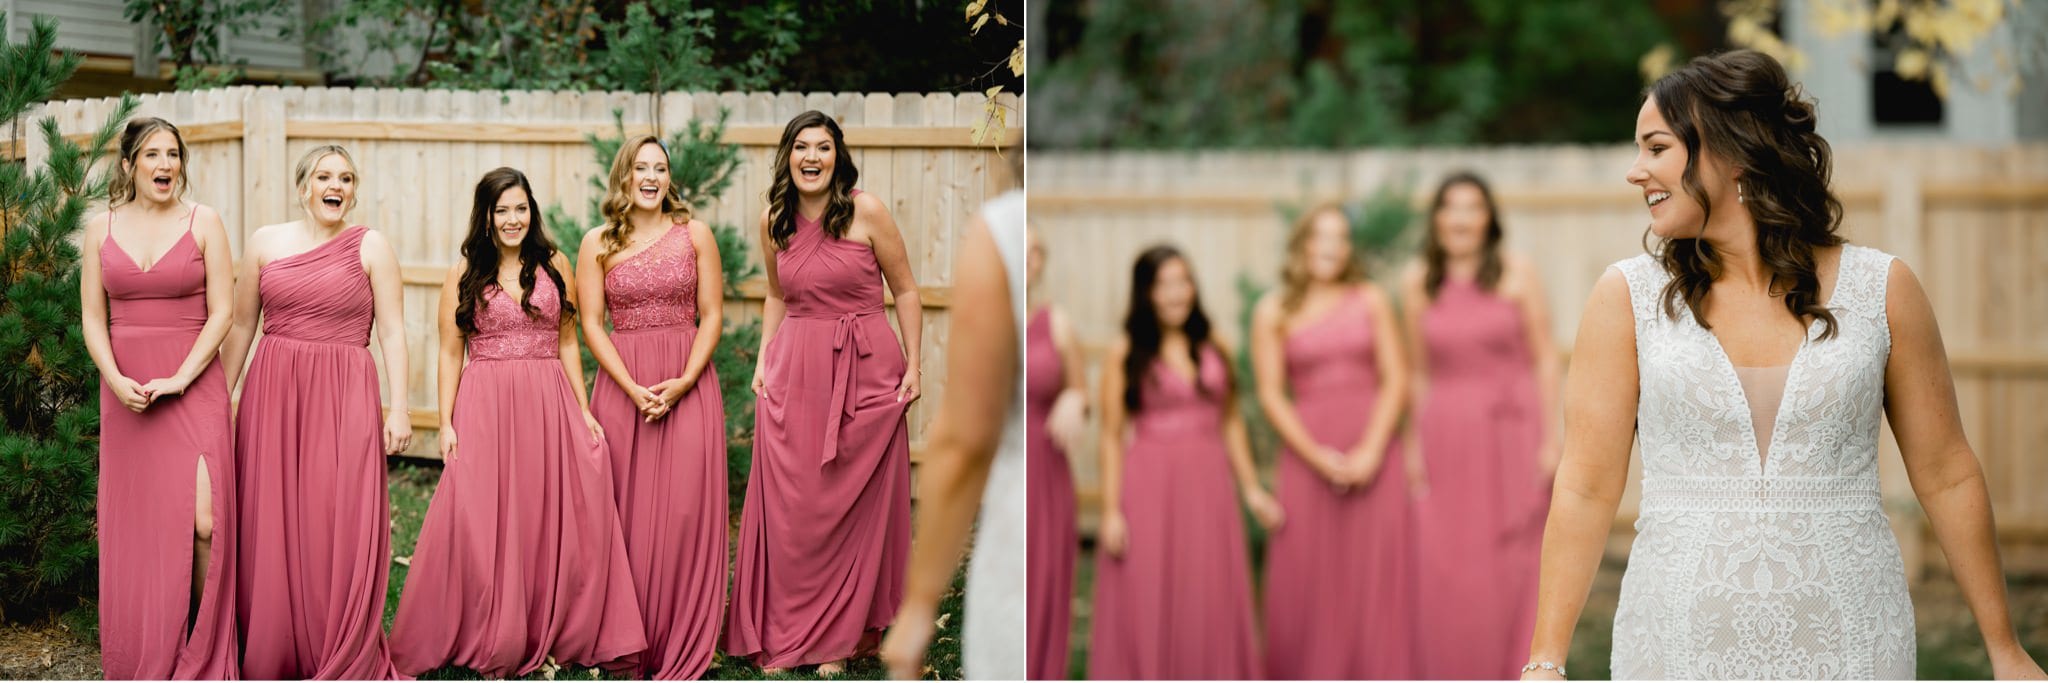 bridesmaid reveal at willow on grand